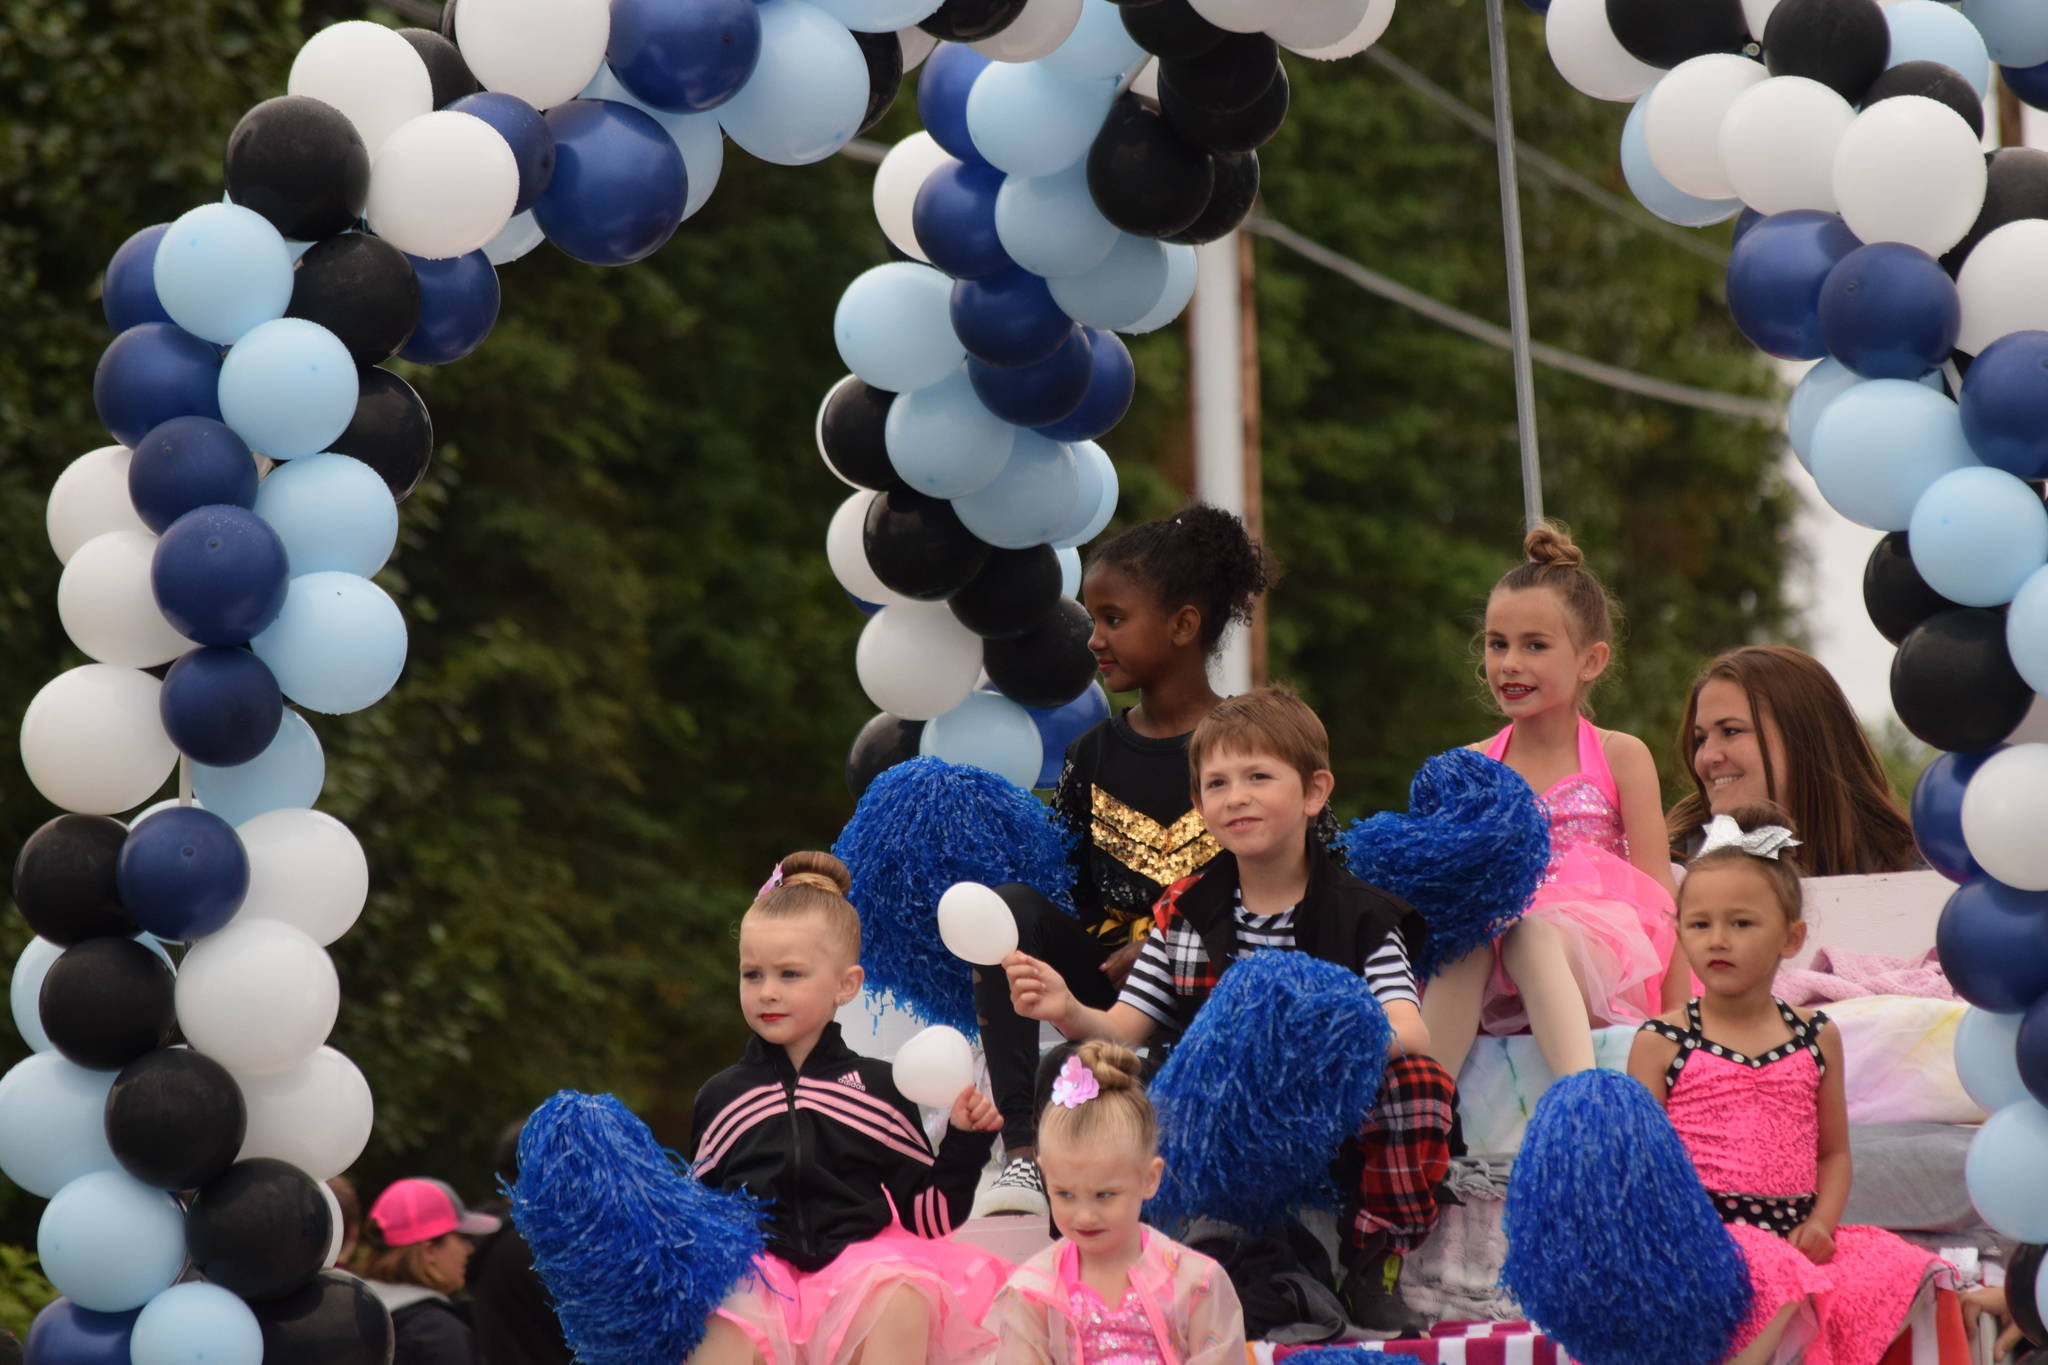 Members of Forever Dance Alaska ride their float during the Soldotna Progress Days parade on Saturday, July 24, 2021. (Camille Botello / Peninsula Clarion)